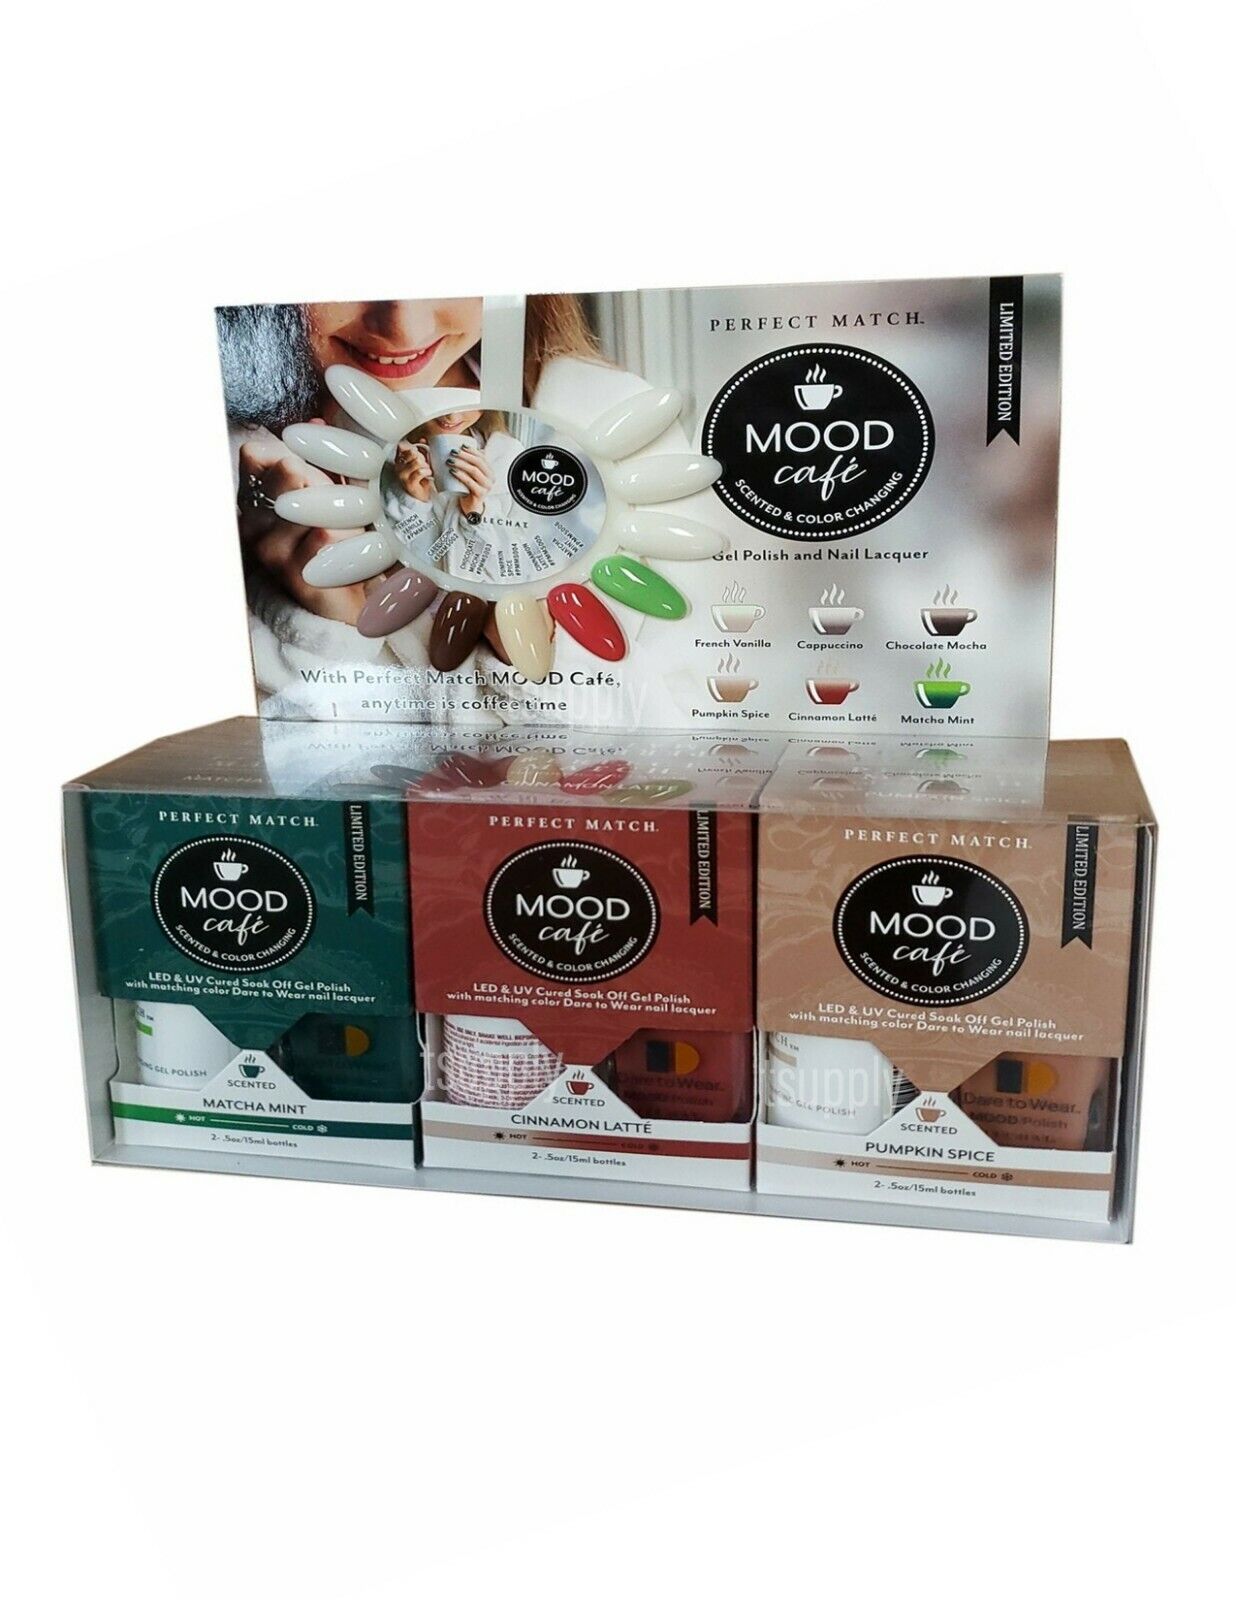 Perfect Match Mood – Café Collection Scented & Color Changing 6pcs #PMMC01